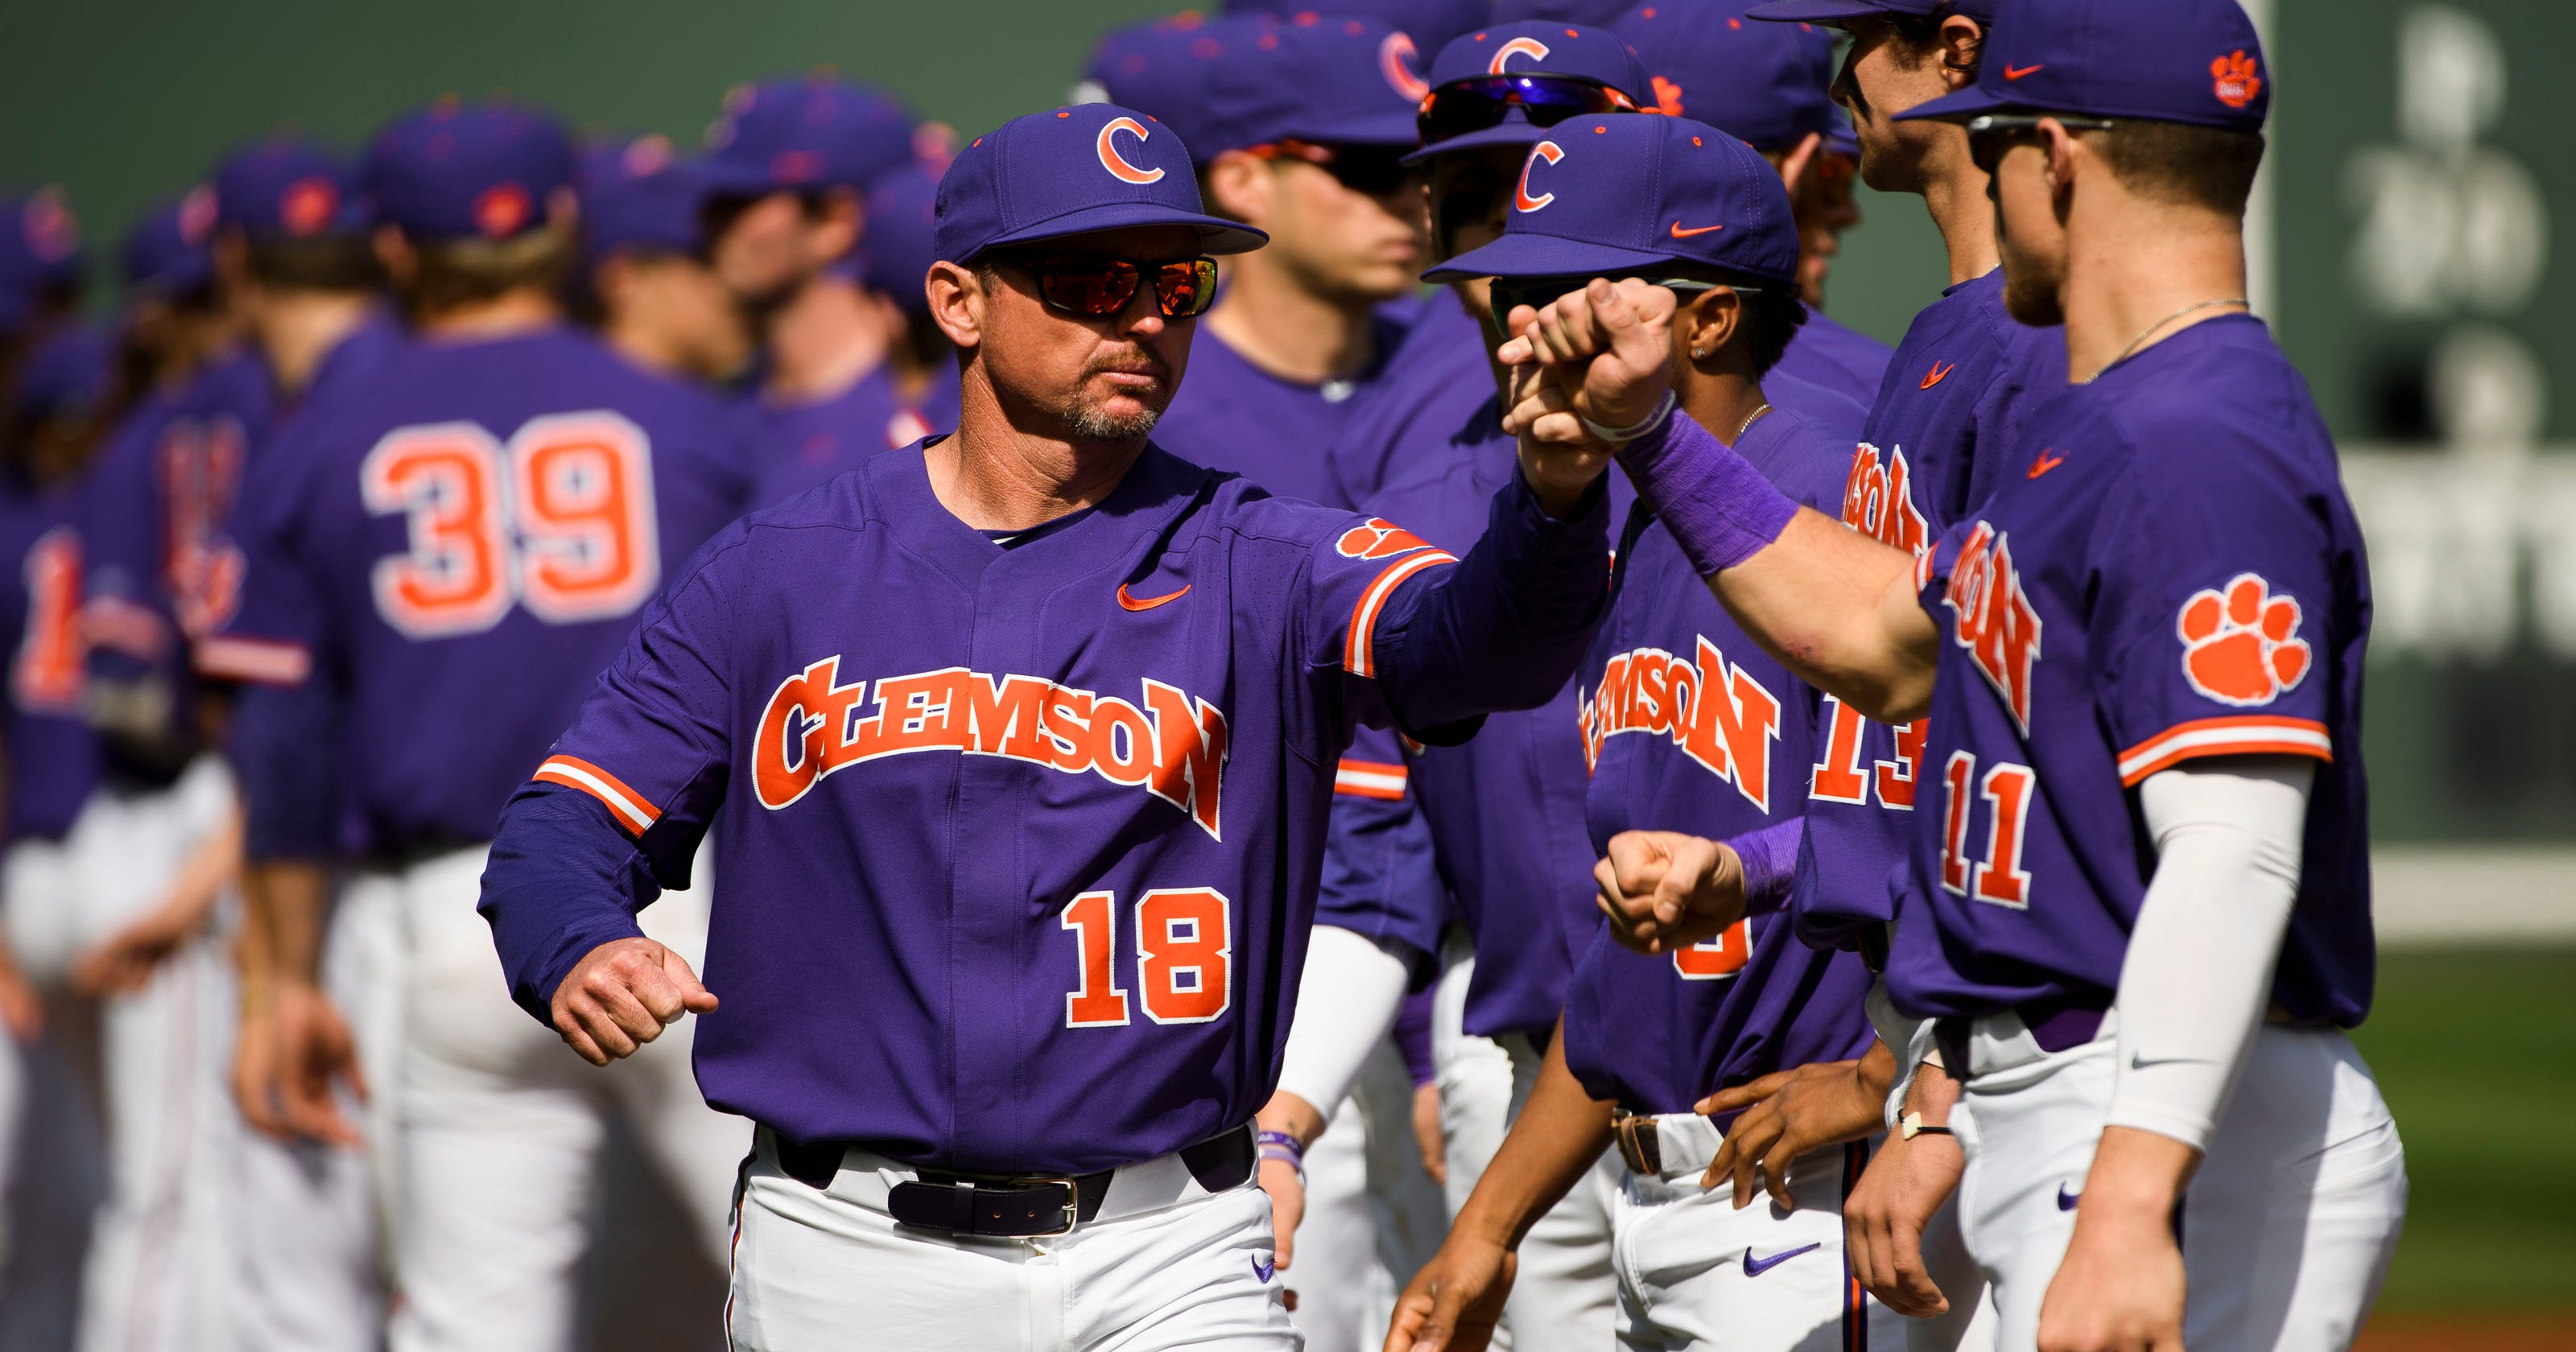 Clemson baseball team selected for NCAA Tournament at No. 3 seed